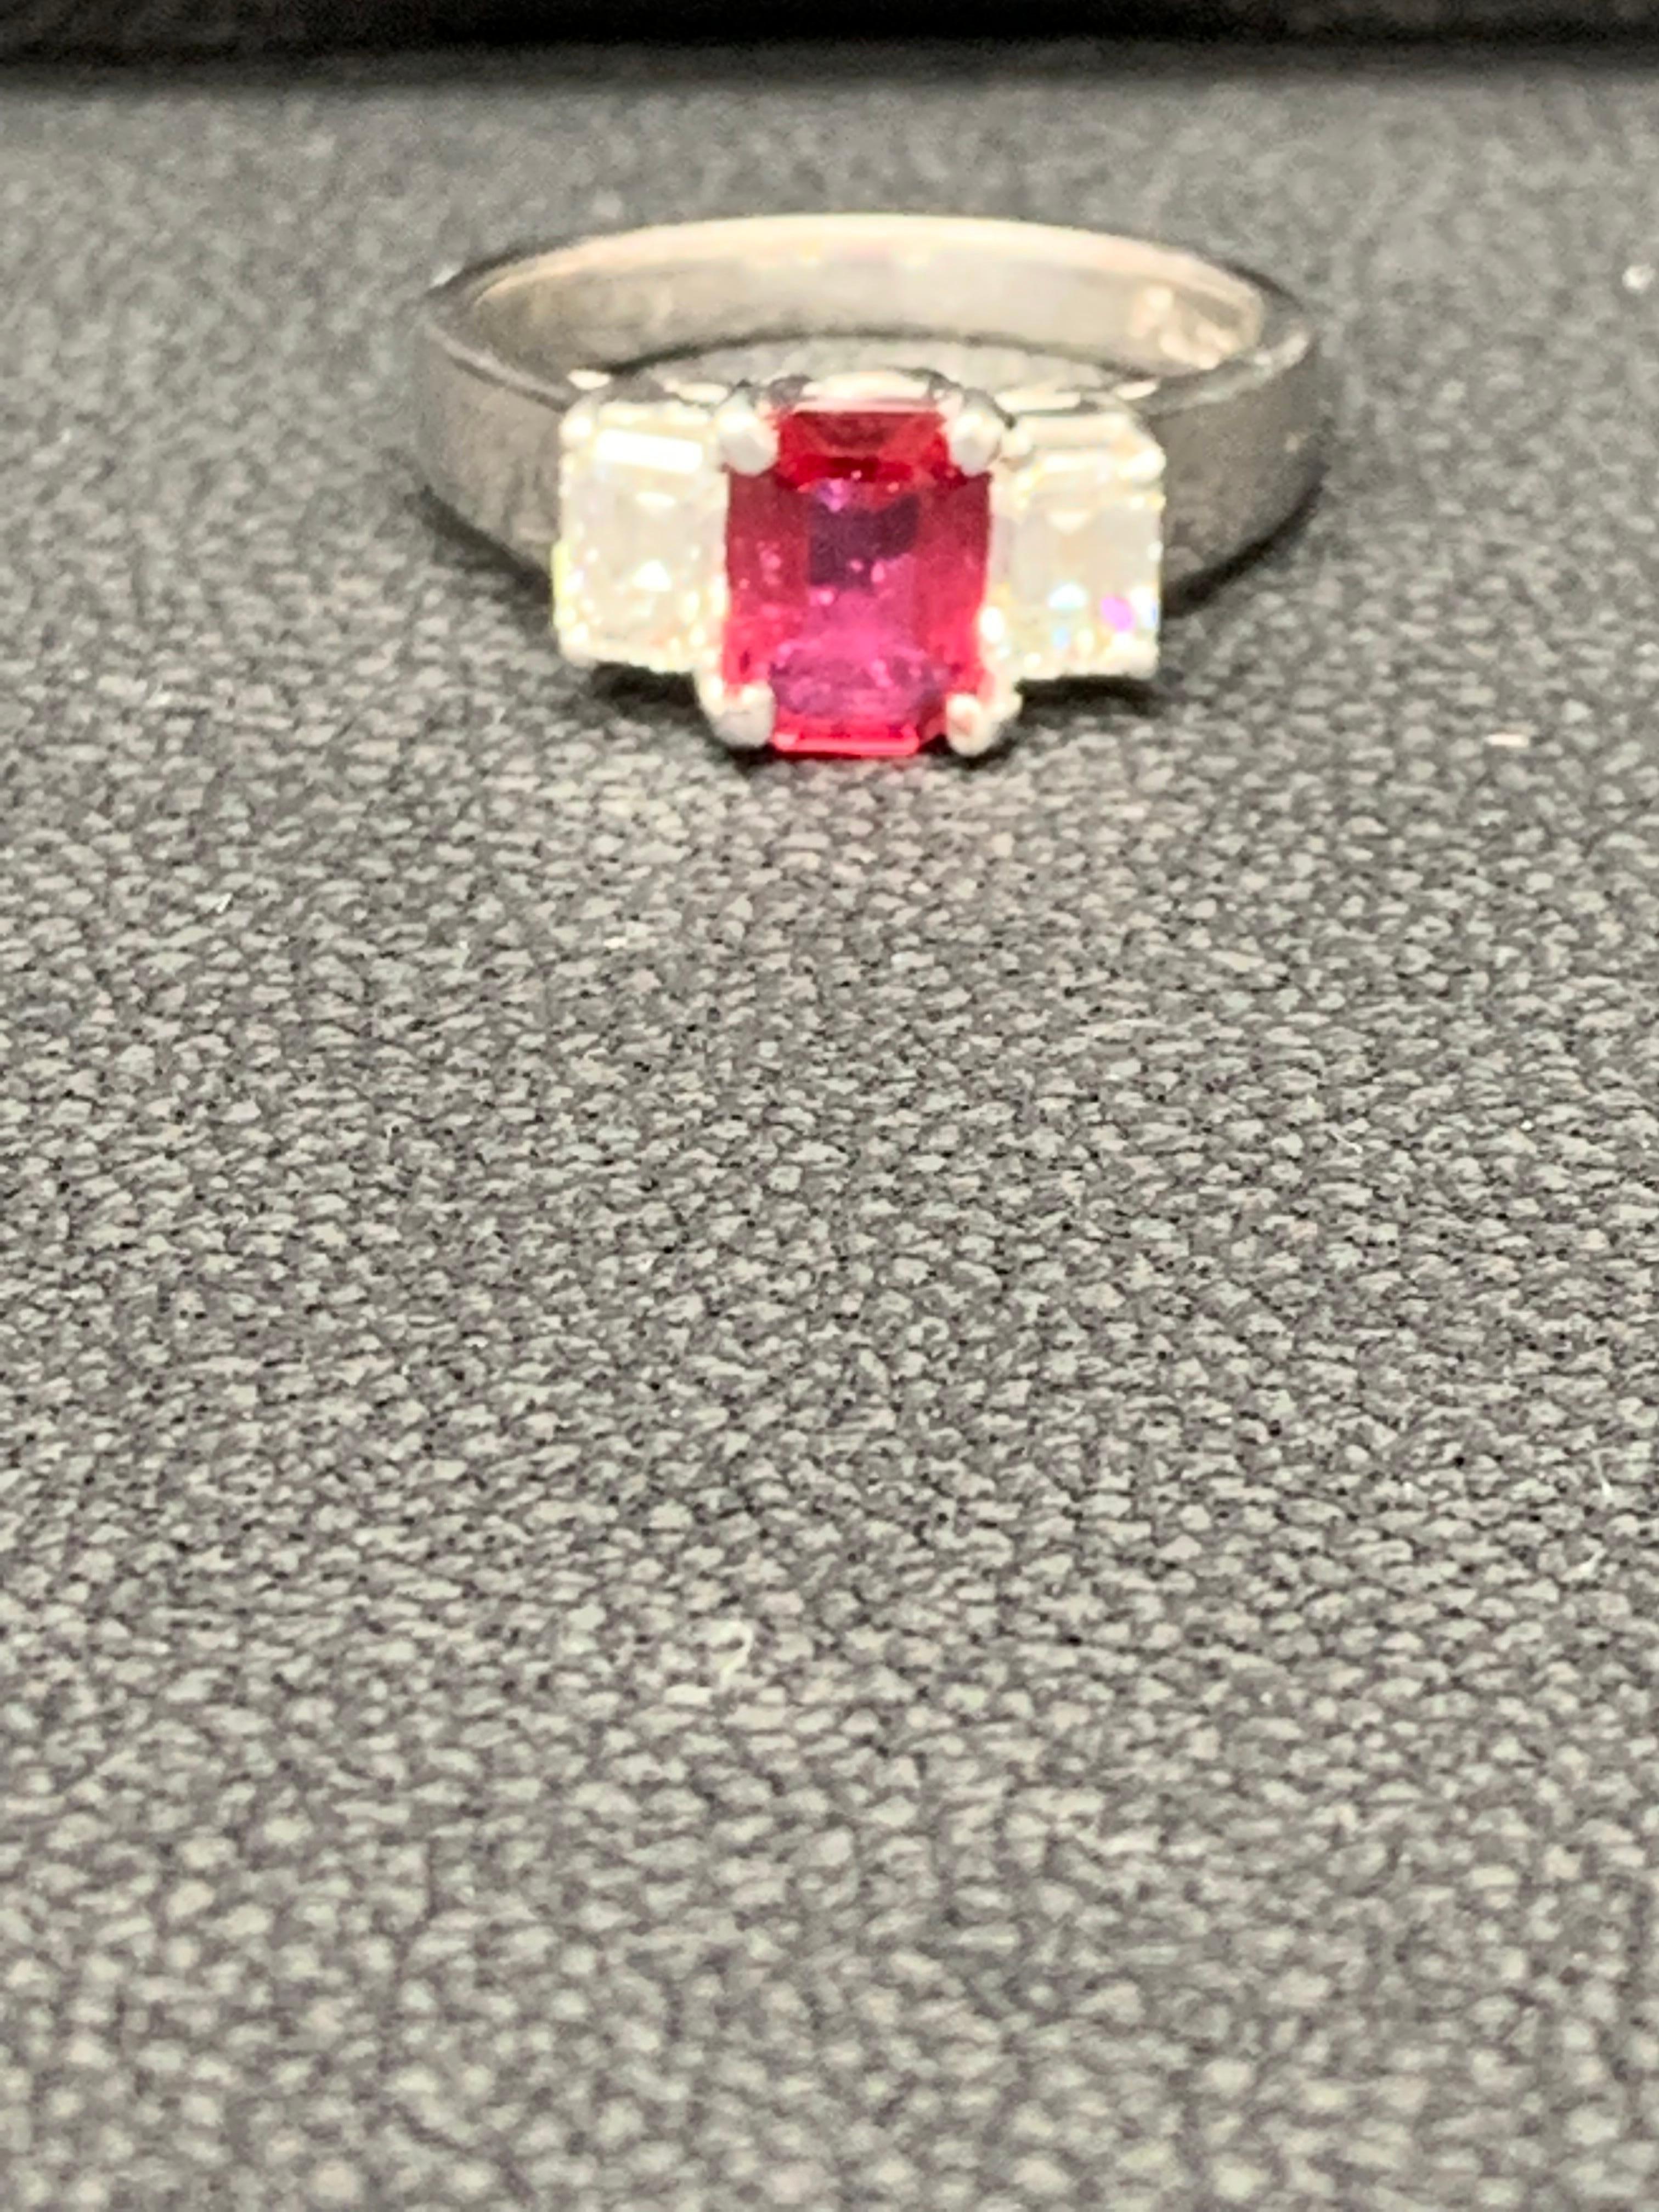 Showcases an Emerald cut, Ruby weighing 1.26 carats, flanked by two brilliant baguette diamonds weighing 1.34 carats total. Elegantly set in a polished platinum composition.